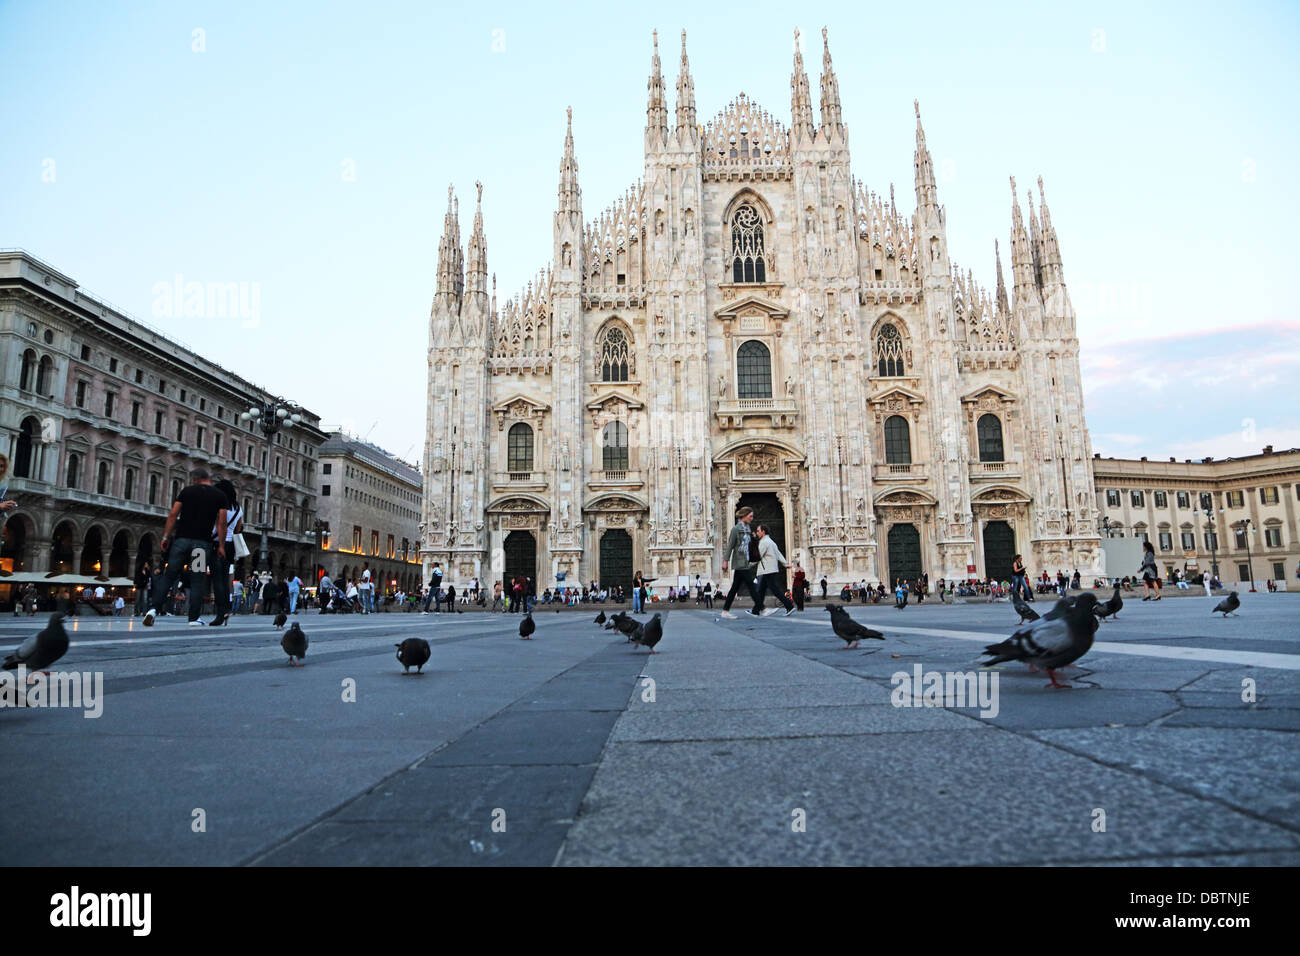 Piazza del Duomo and the front entrance of the Duomo in Milan Italy Stock Photo